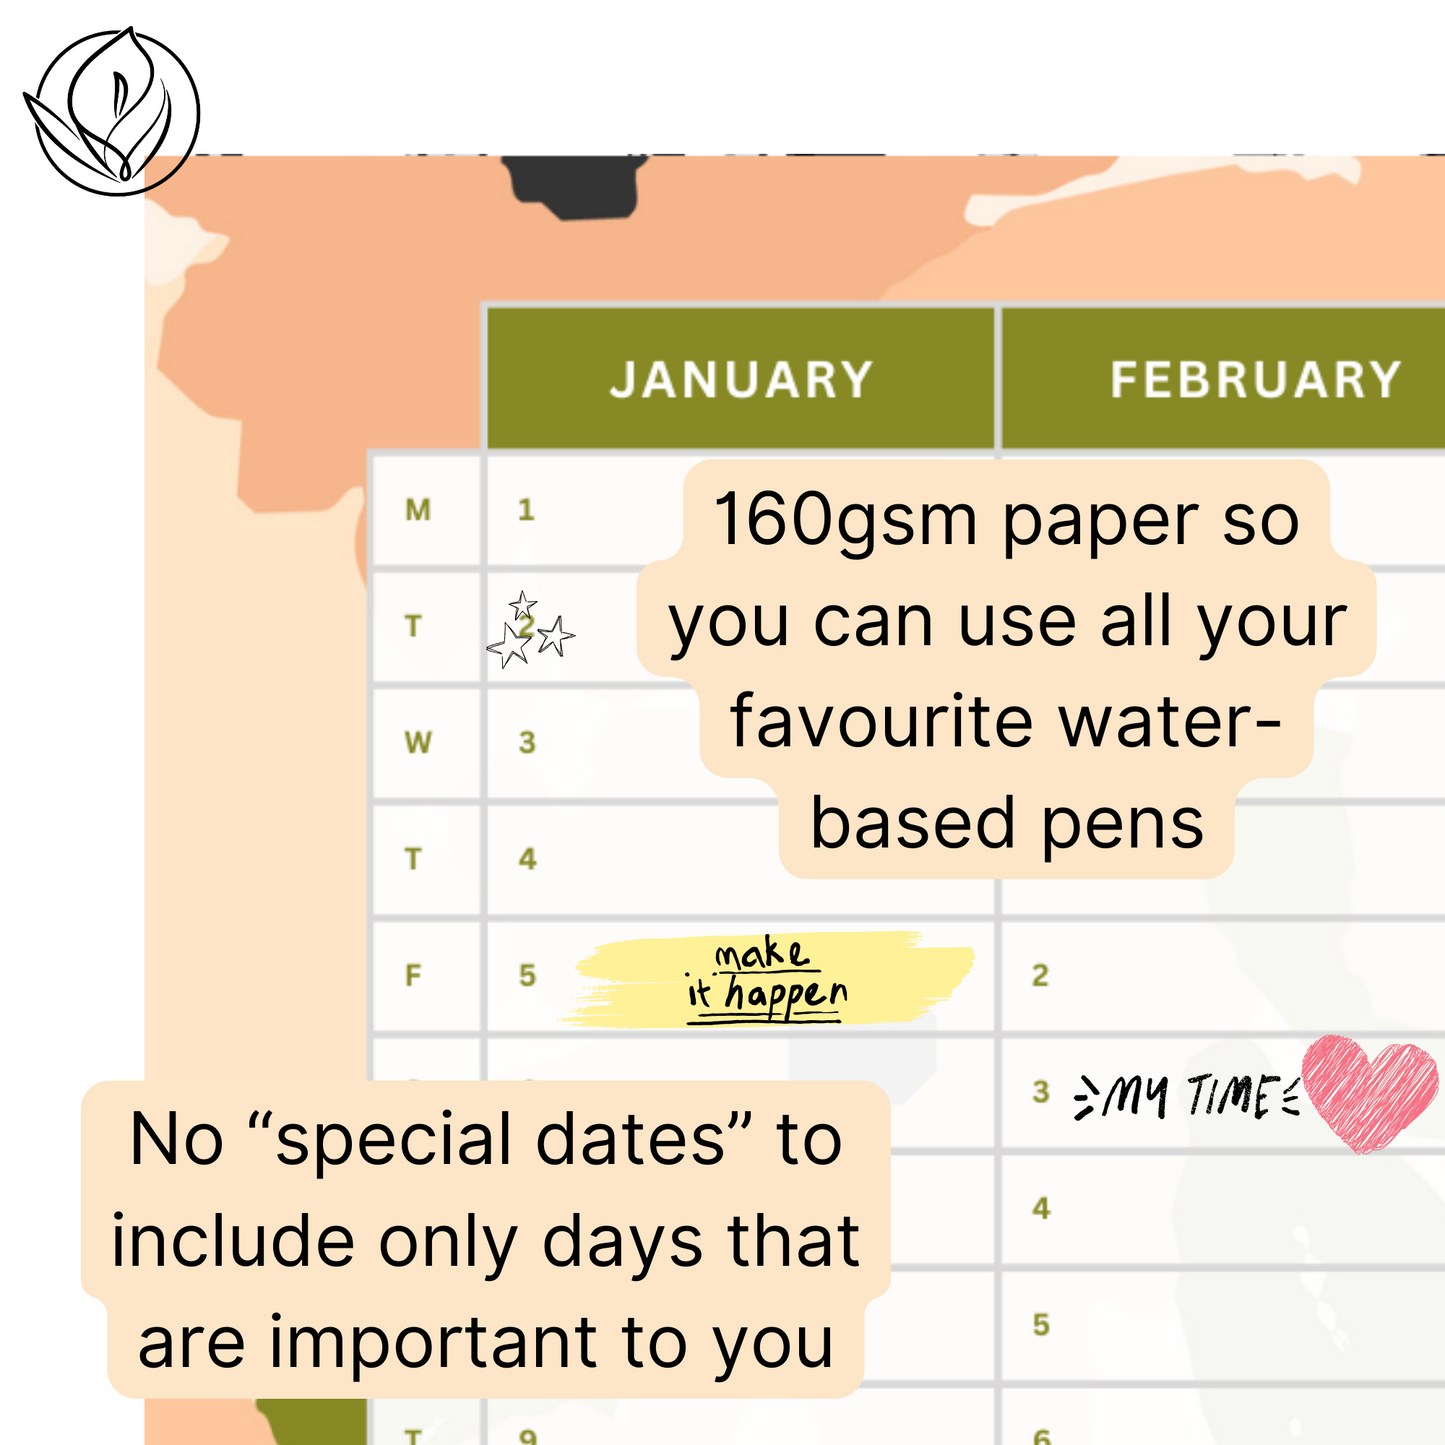 Just Peachy | 2024 Paper Wall Planner